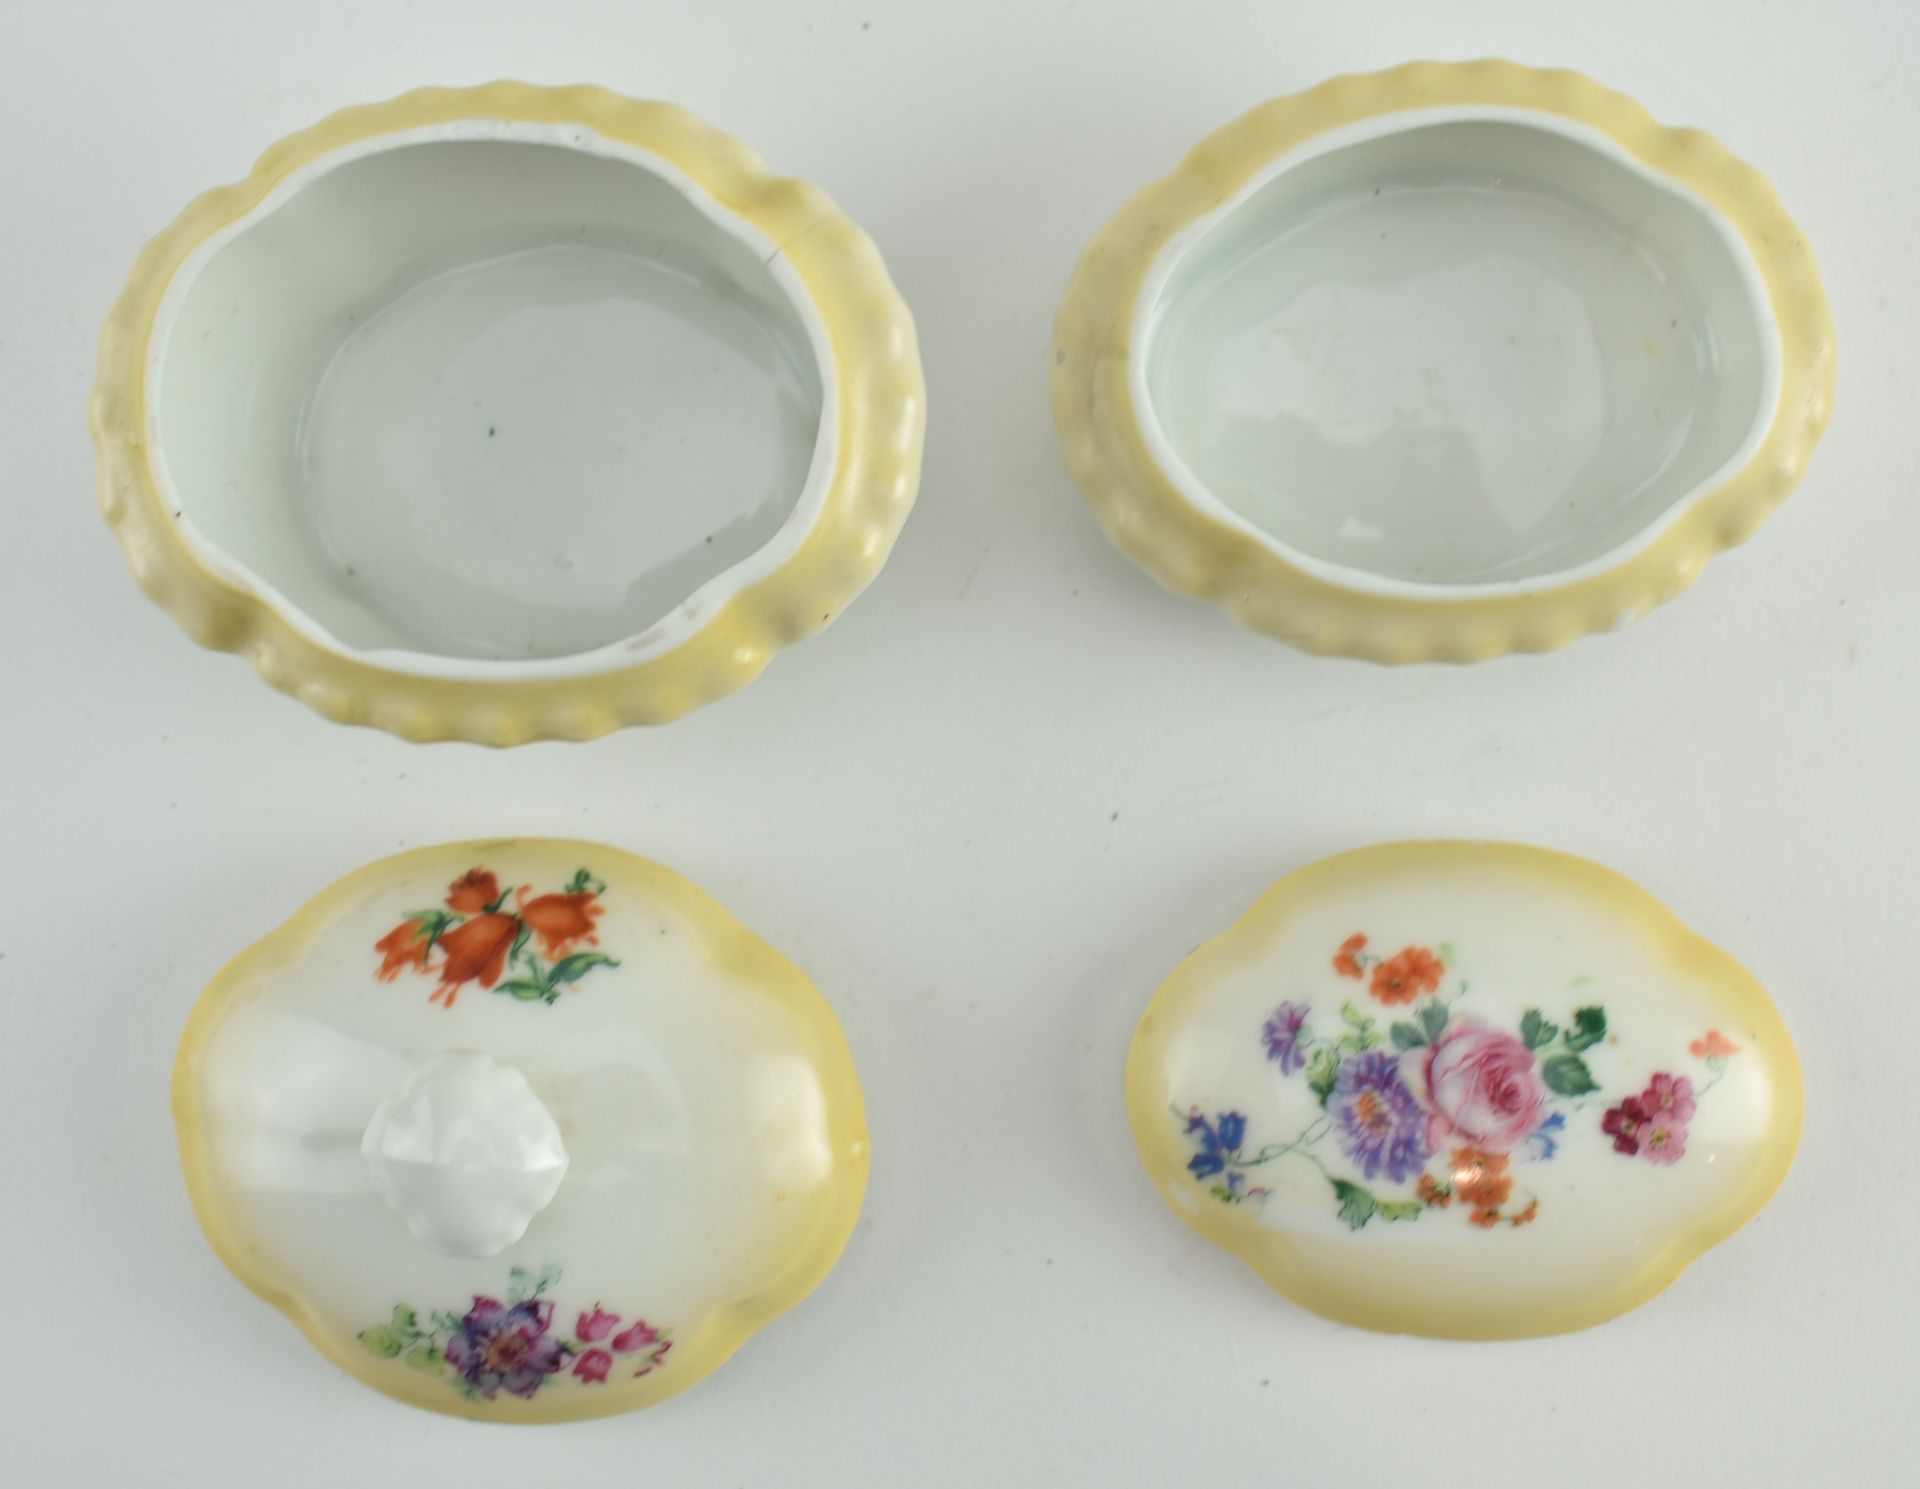 COLLECTION OF FOUR HAND PAINTED FLORAL PORCELAIN PIECES - Image 6 of 10